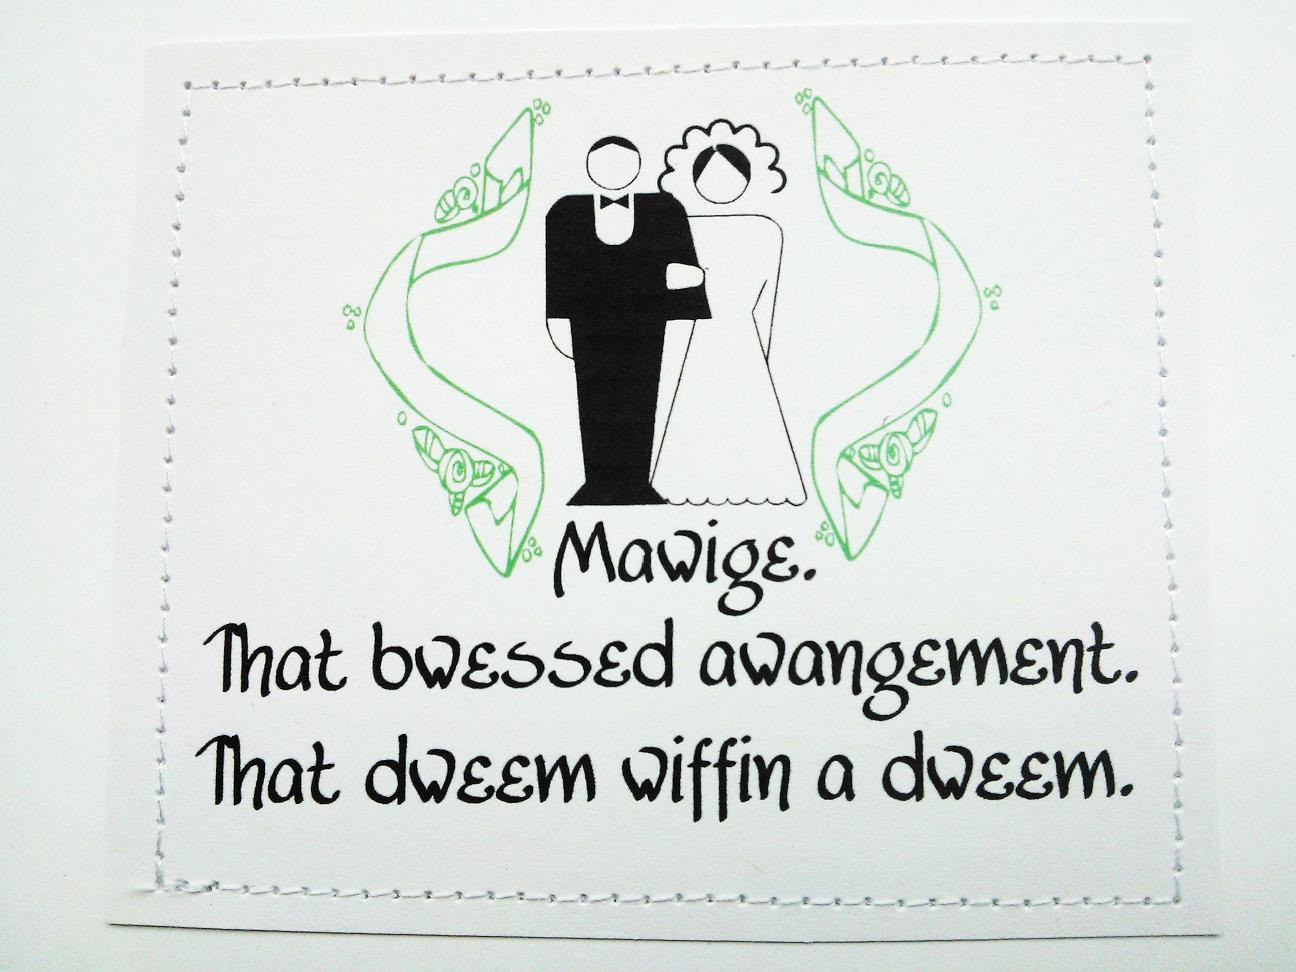 Princes Bride Marriage Quote
 The Princess Bride quote wedding card Mawige by sewdandee